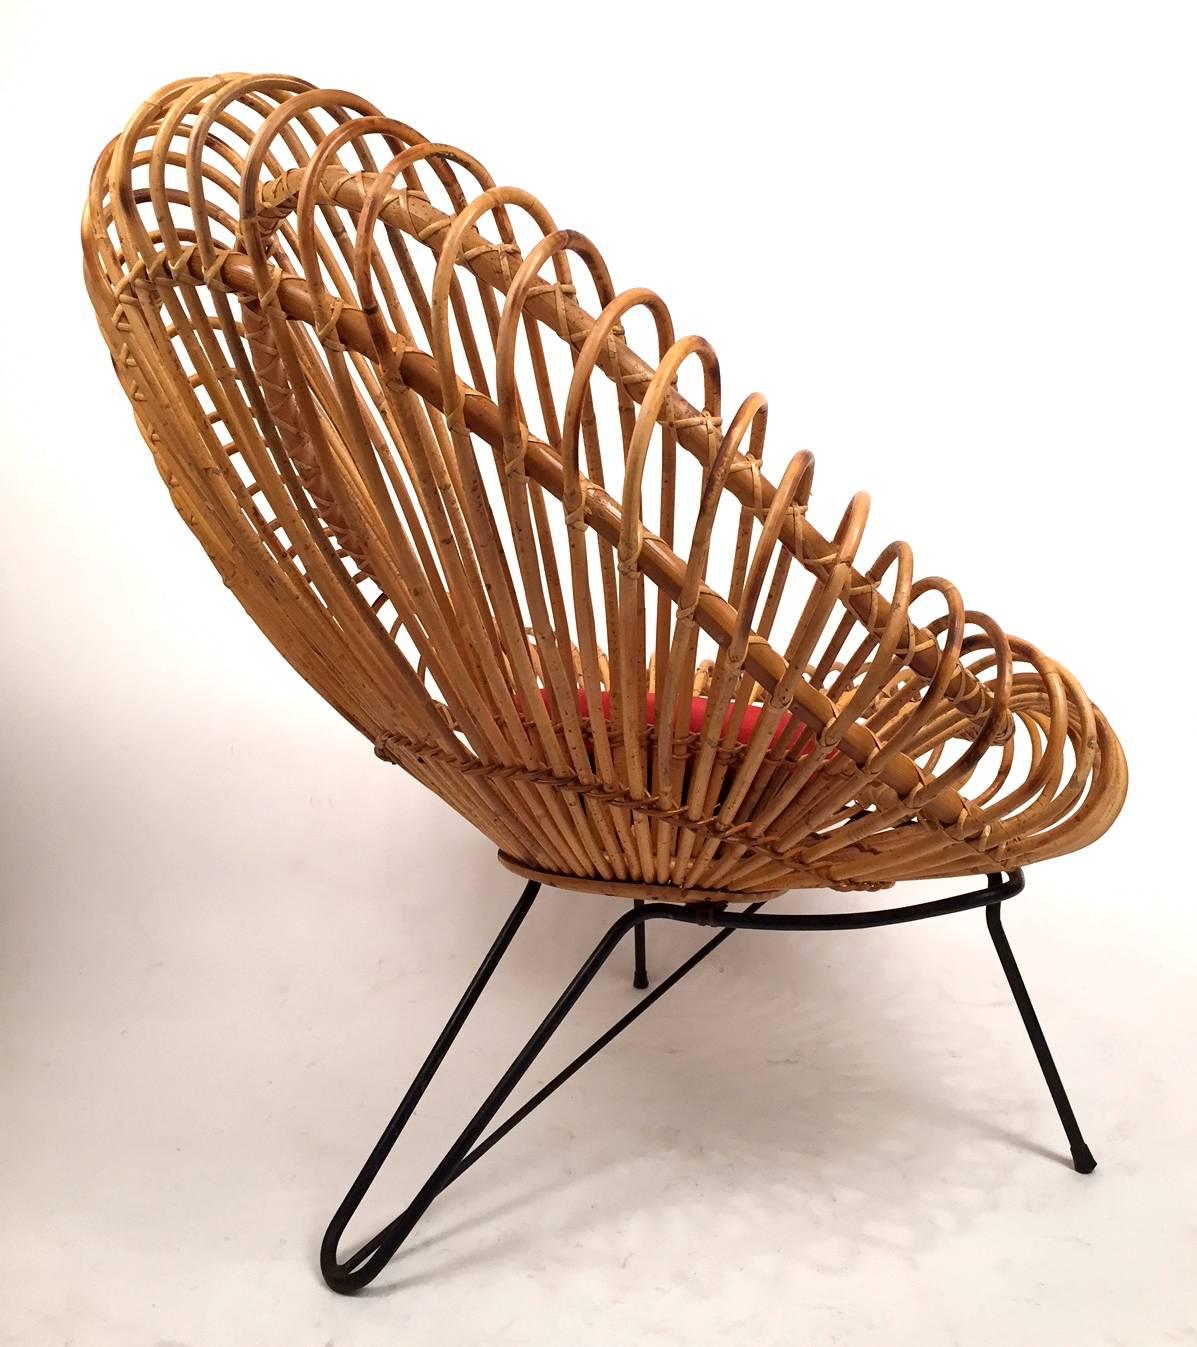 French Pair of Janine Abraham and Dirk Jan Rol Basketware Lounge Chairs